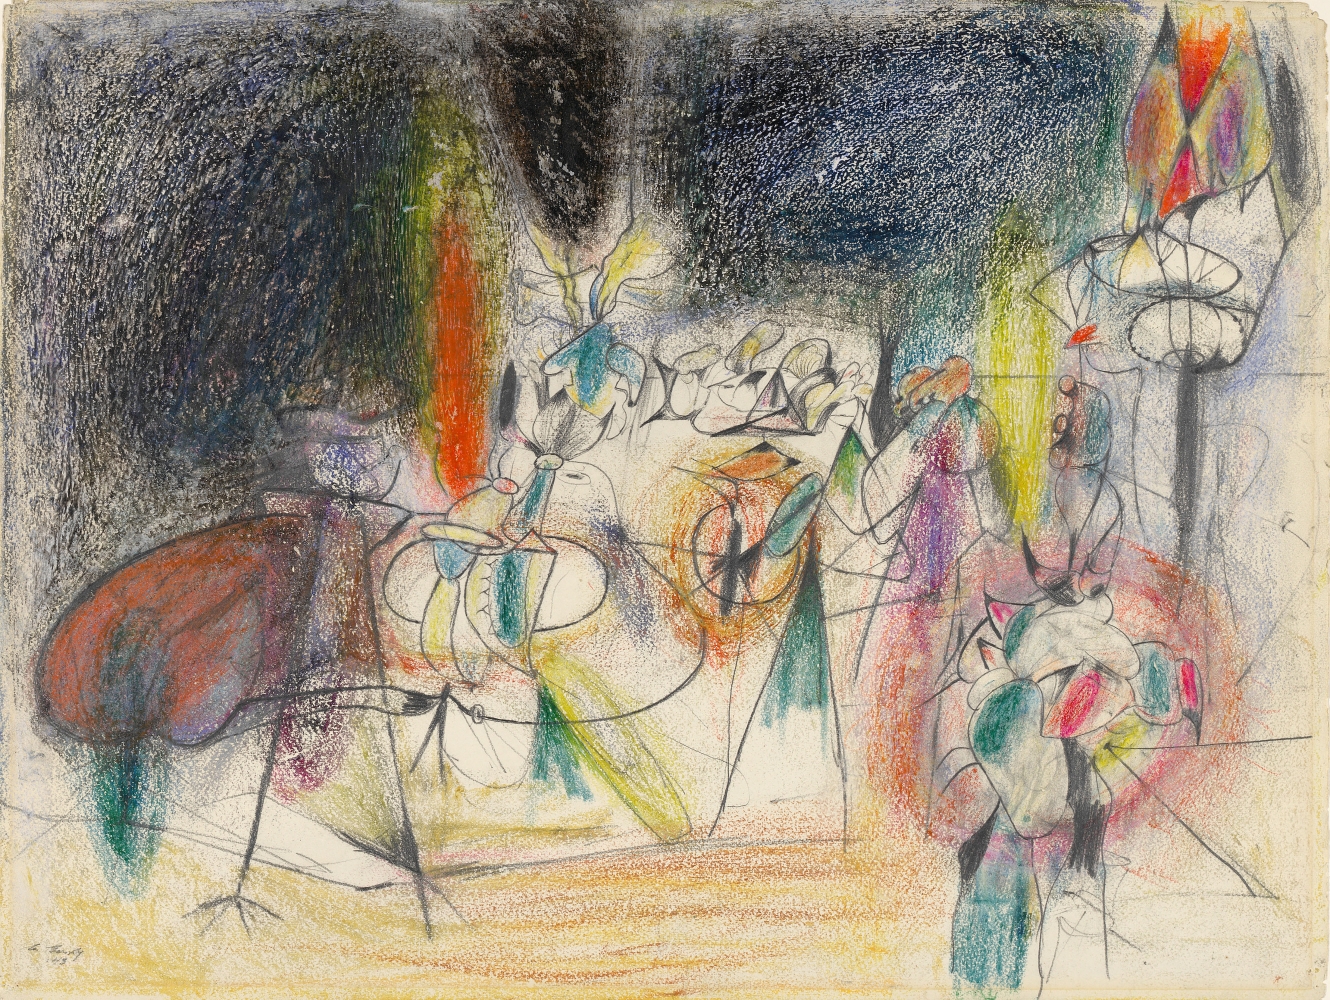 Untitled, 1943, crayon and graphite pencil on paper, 20 3/4 x 27 7/16 in. (52.7 x 69.7 cm). Solomon R. Guggenheim Museum, New York. Gift of Rook McCulloch, 77.2332. [AGCR: D0999]